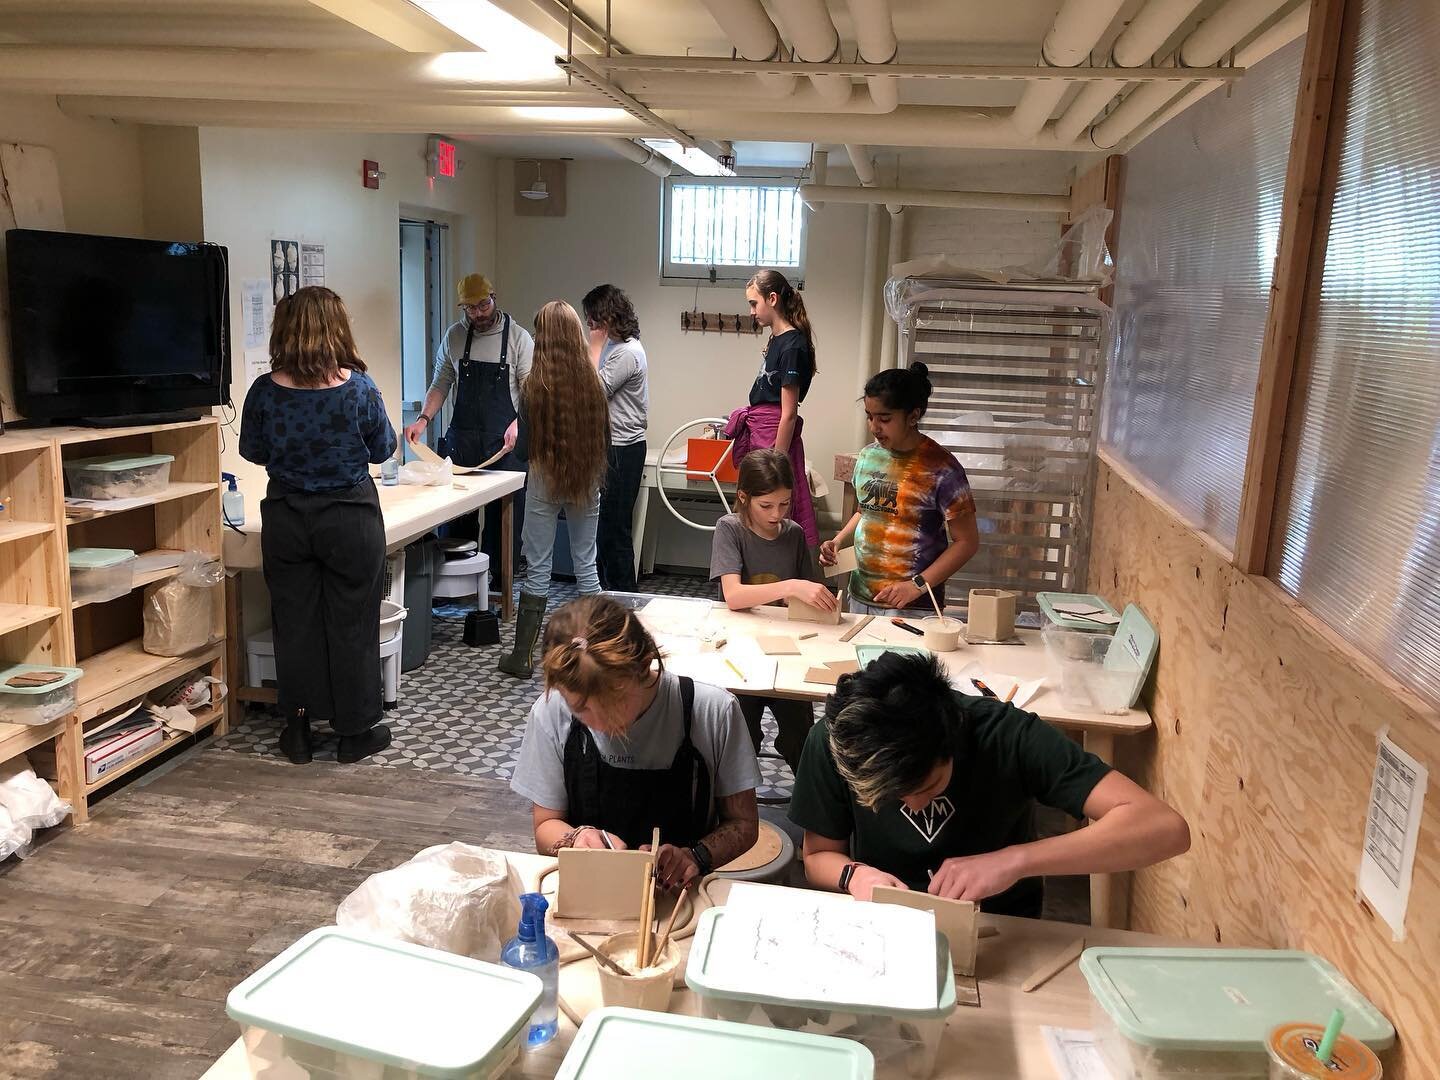 Hello, Club Mud! Our middle school students are currently deep into studio exploration where students learn a craft intended to expand their tools of expression! Sort of learning a new language - only this time in clay! We are excited to see where th